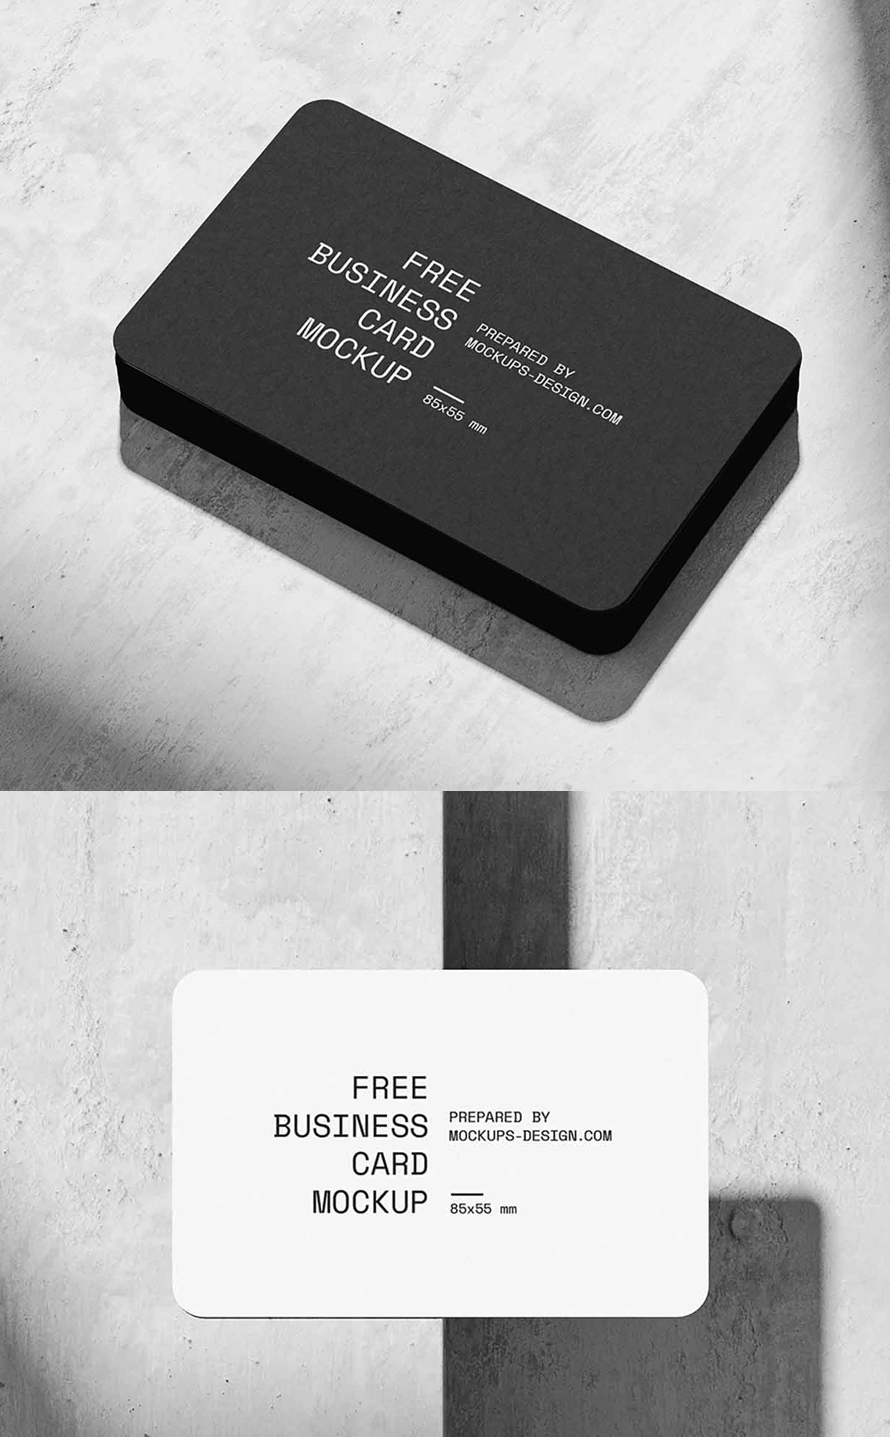 Round Corners Business Card Mockups (4 Templates)